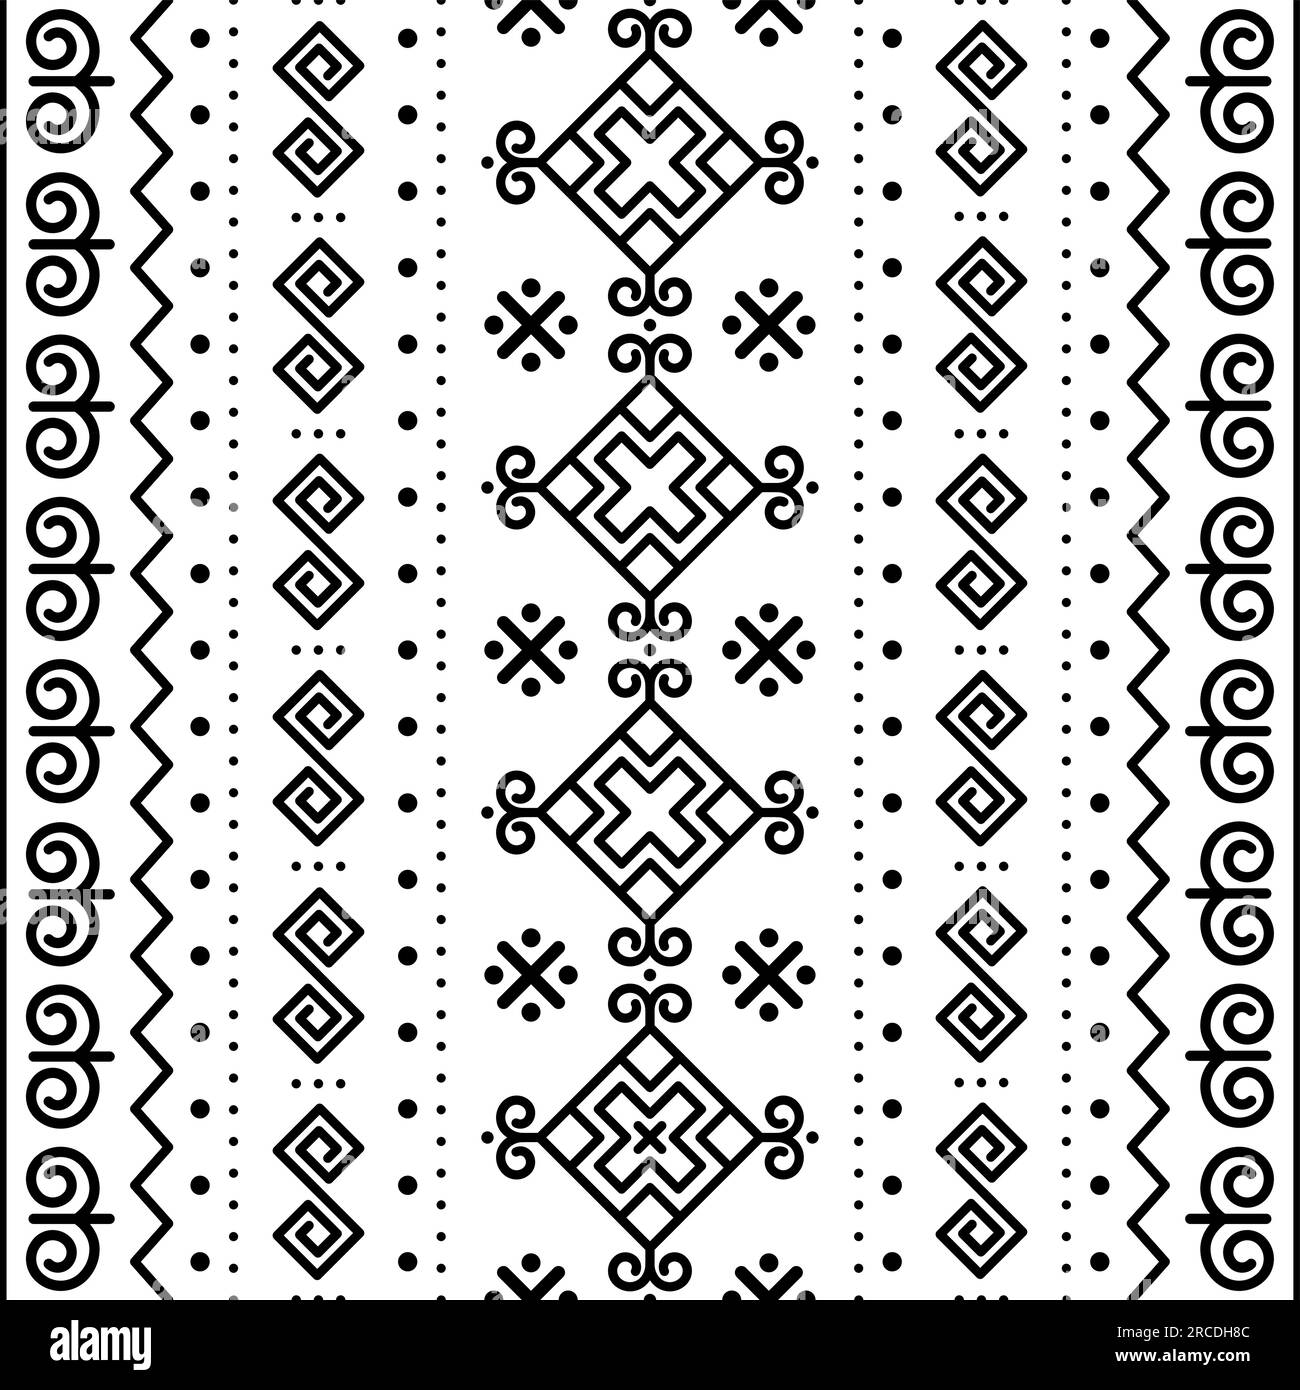 Slovak folk art vector seamless vertical pattern with ethnic, tribal geometric decor - inspired by traditional painted art from village Cicmany Stock Vector